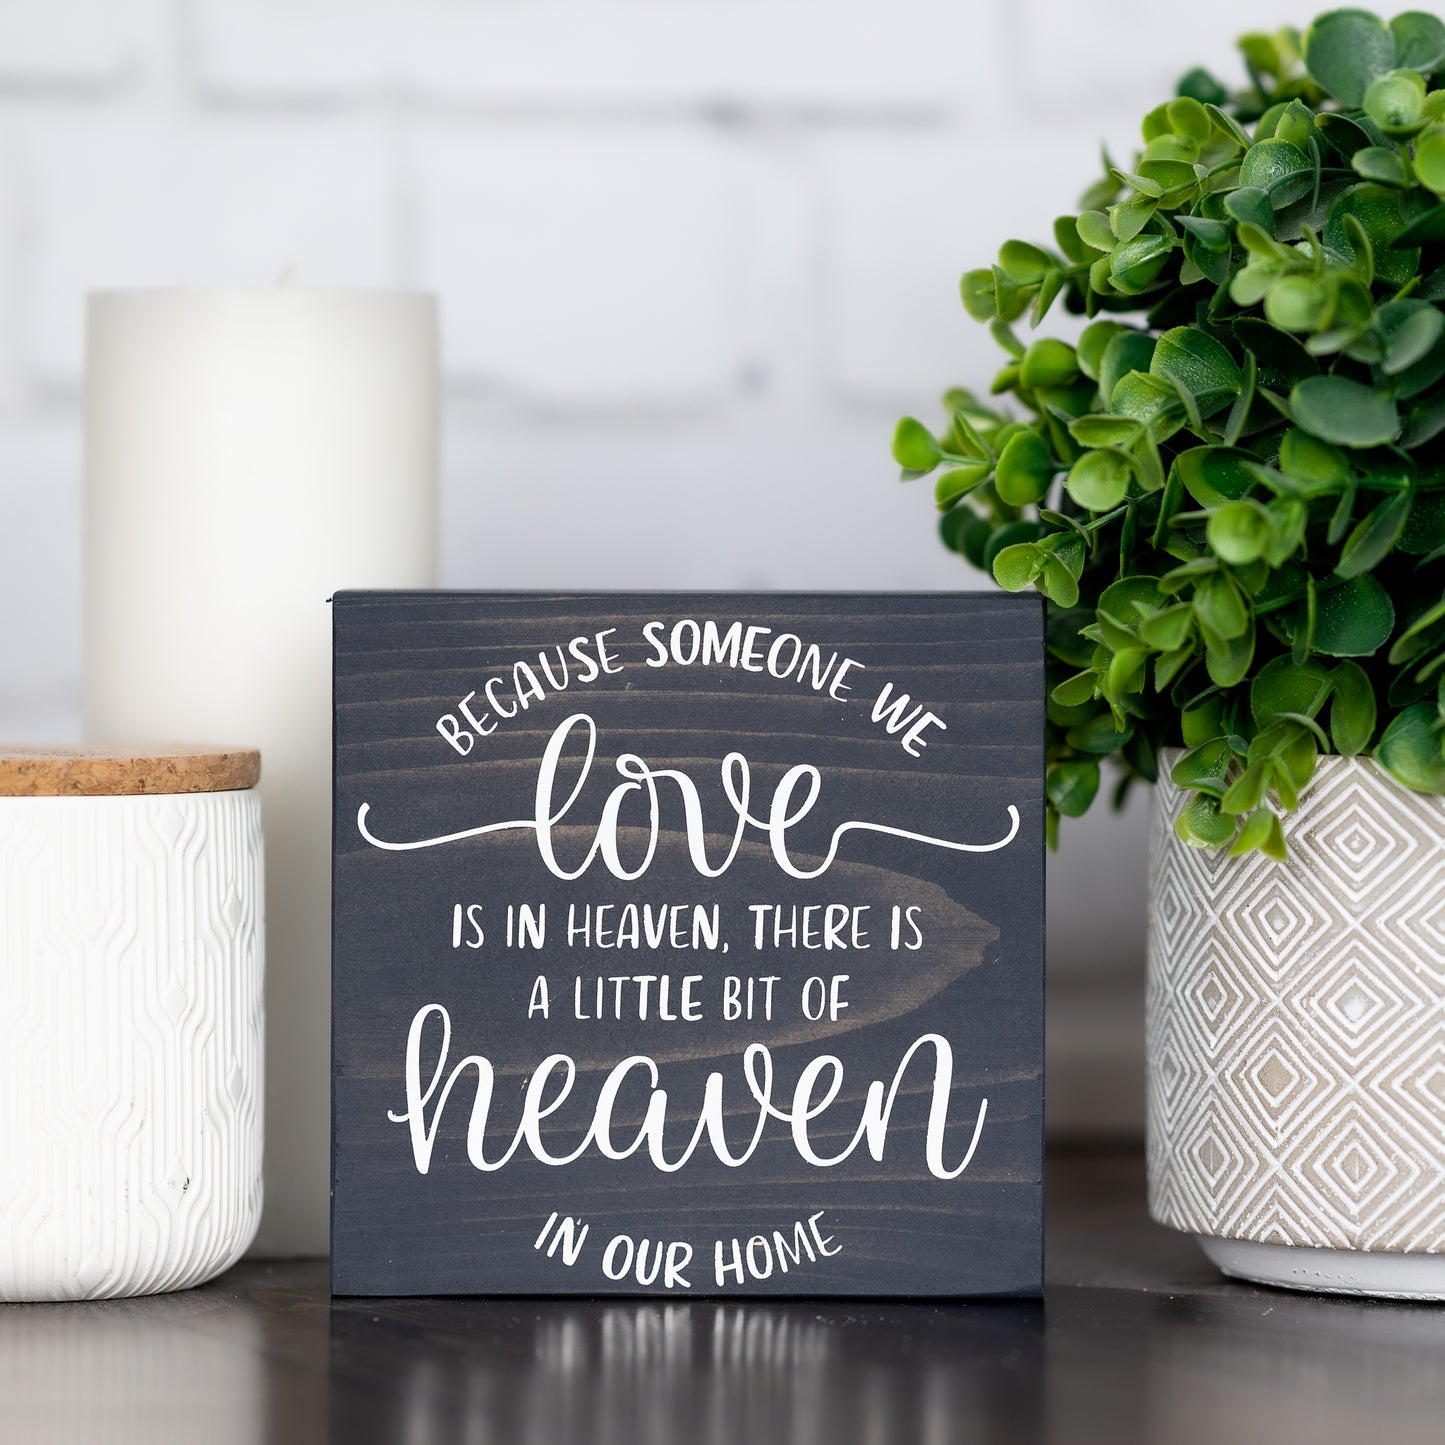 because someone we love is in heaven, there is a little bit of heaven in our home ~ block sign